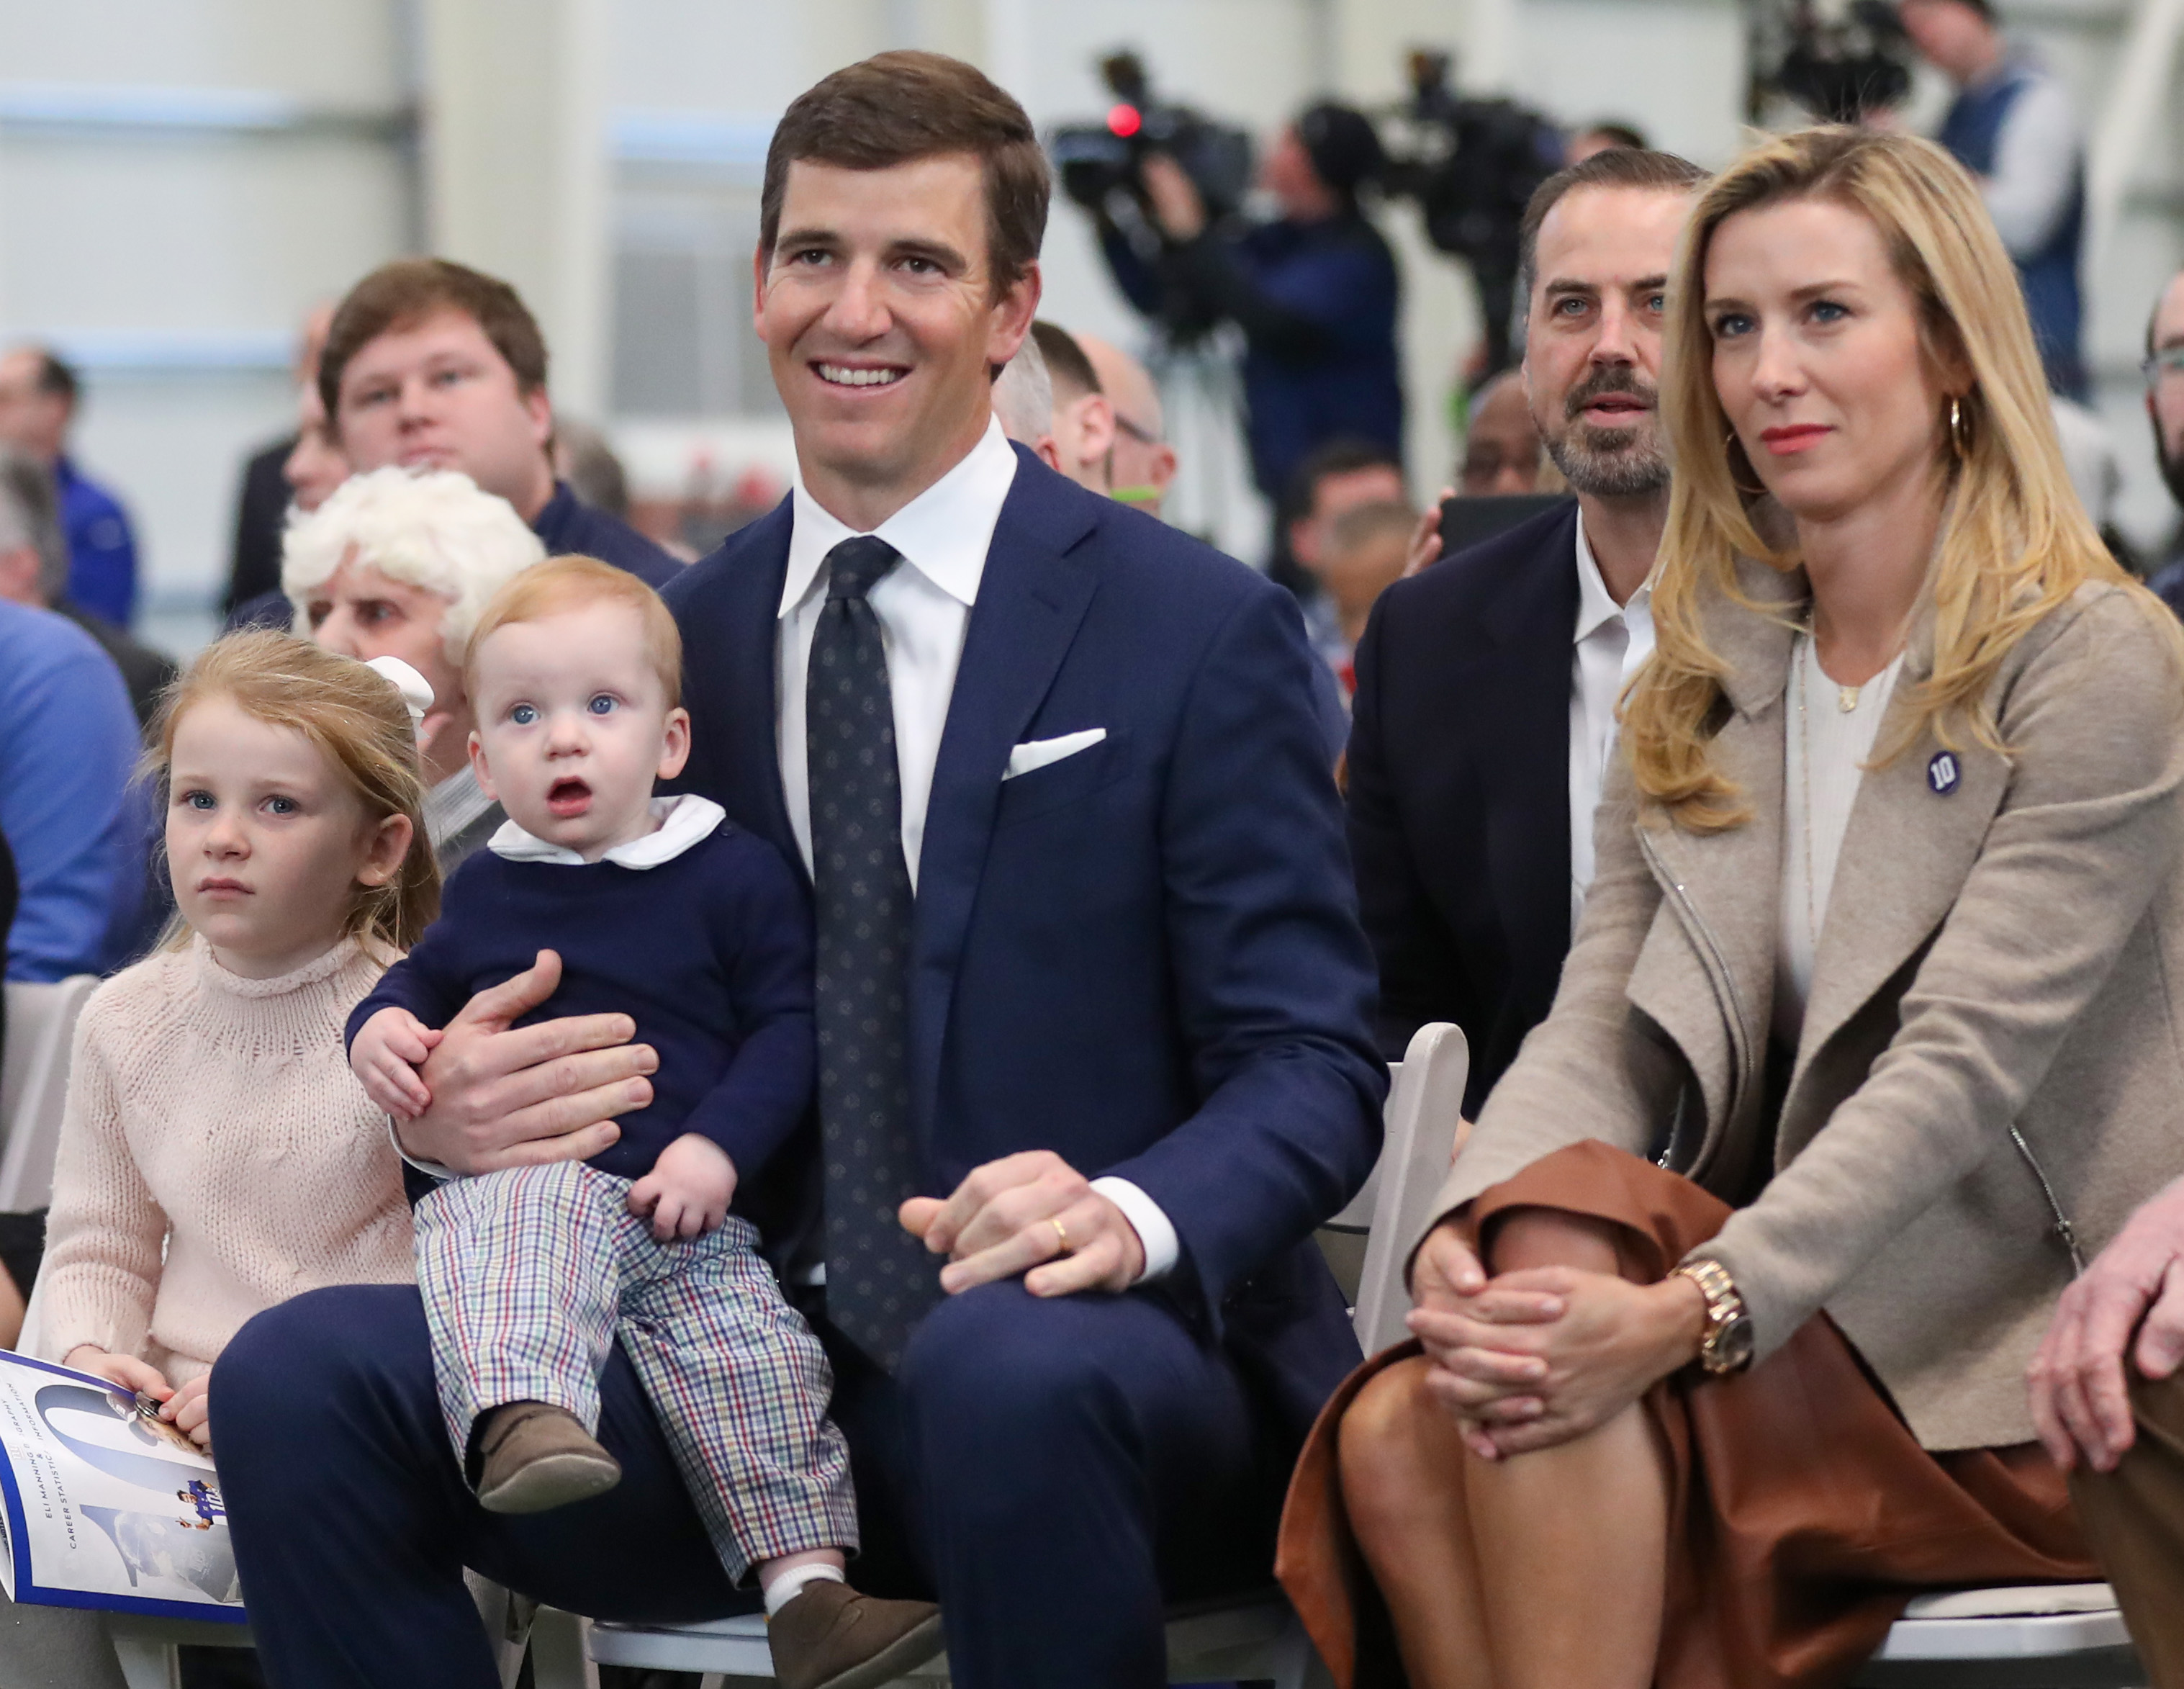 Eli Manning to rejoin Giants in business role, have jersey retired